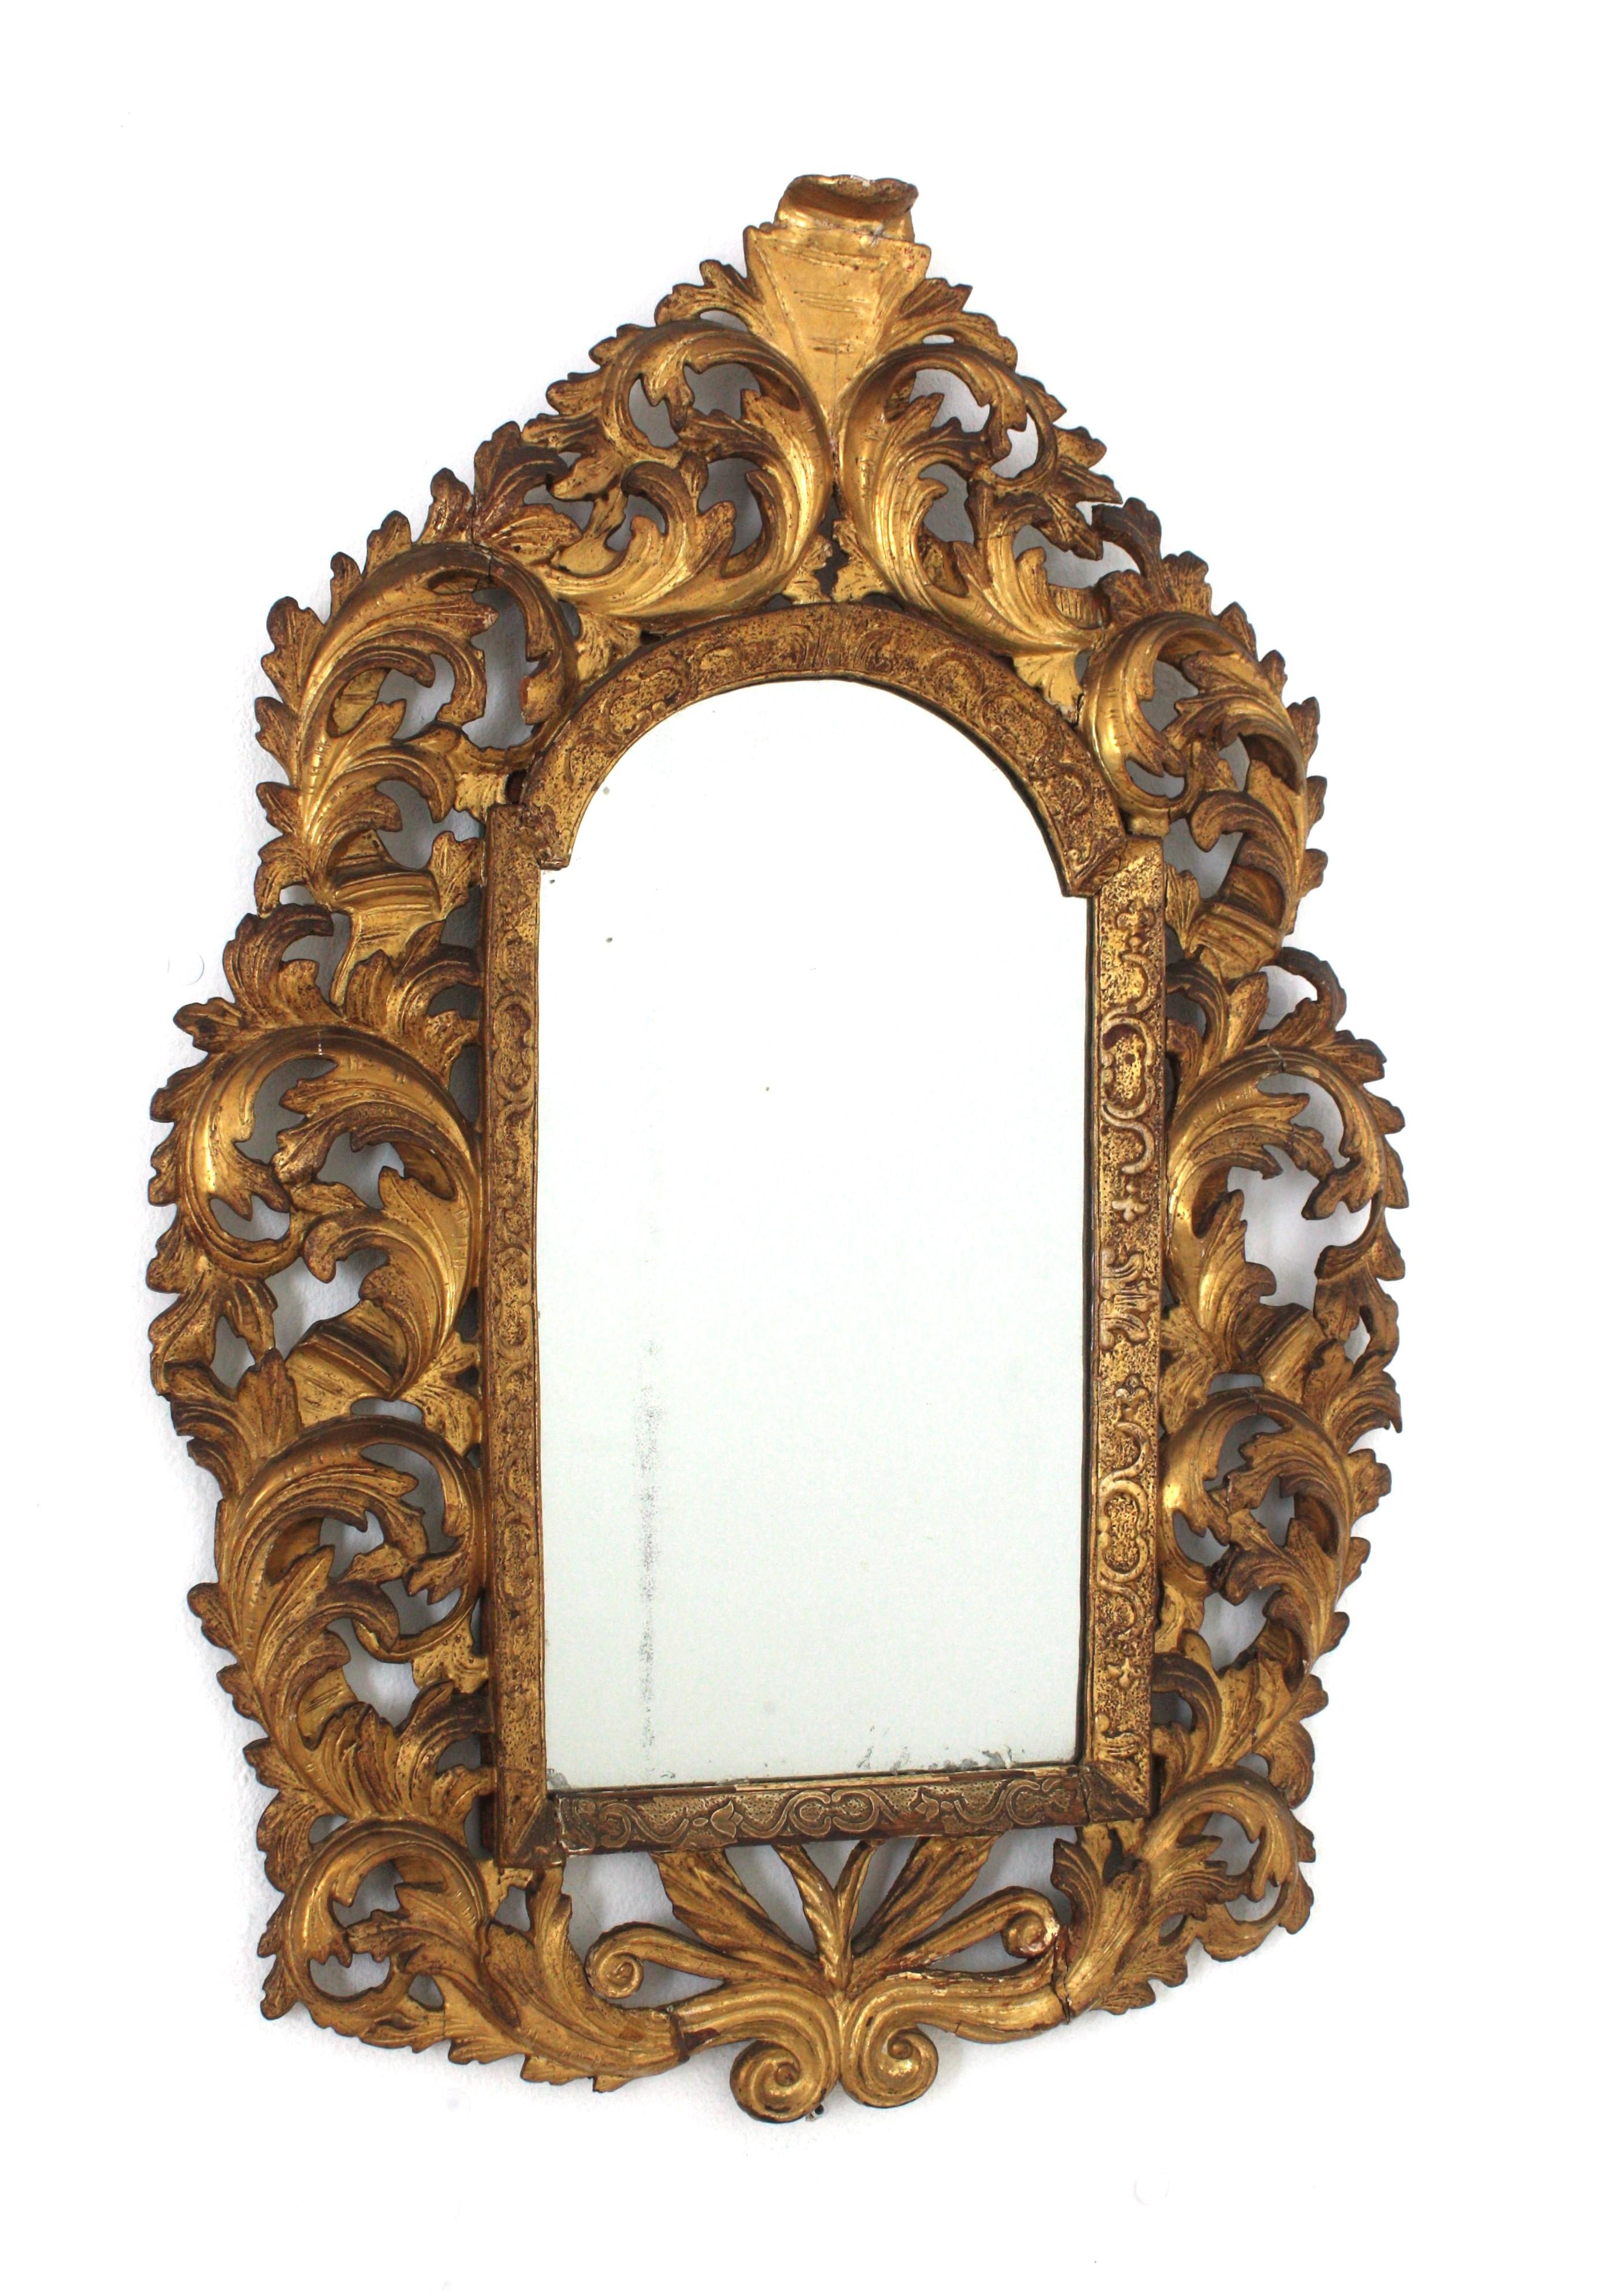 Finely Carved Gold Leaf Giltwood Florentine Wall / Console Mirror, Italy, 1930s-1940s
The frame is richly adorned with carved acanthusleaves, scroll details. It wears its original glass. 
Nice aged patina and original gold leaf gilding.
Lovely to